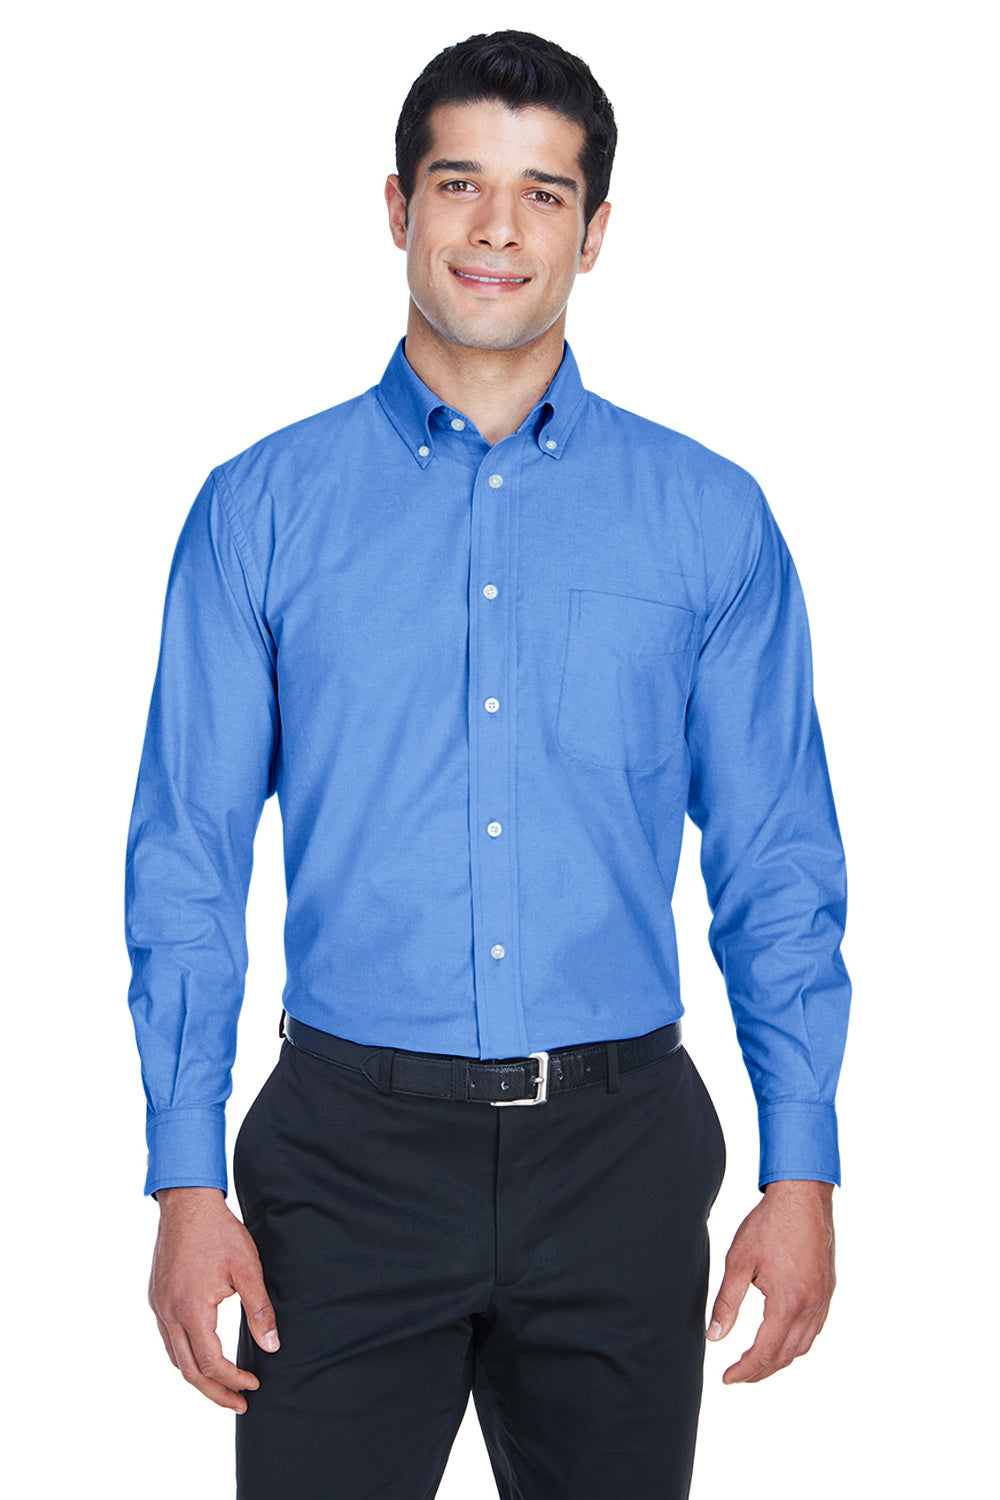 Harriton M600 Mens Oxford Wrinkle Resistant Long Sleeve Button Down Shirt w/ Pocket French Blue Front